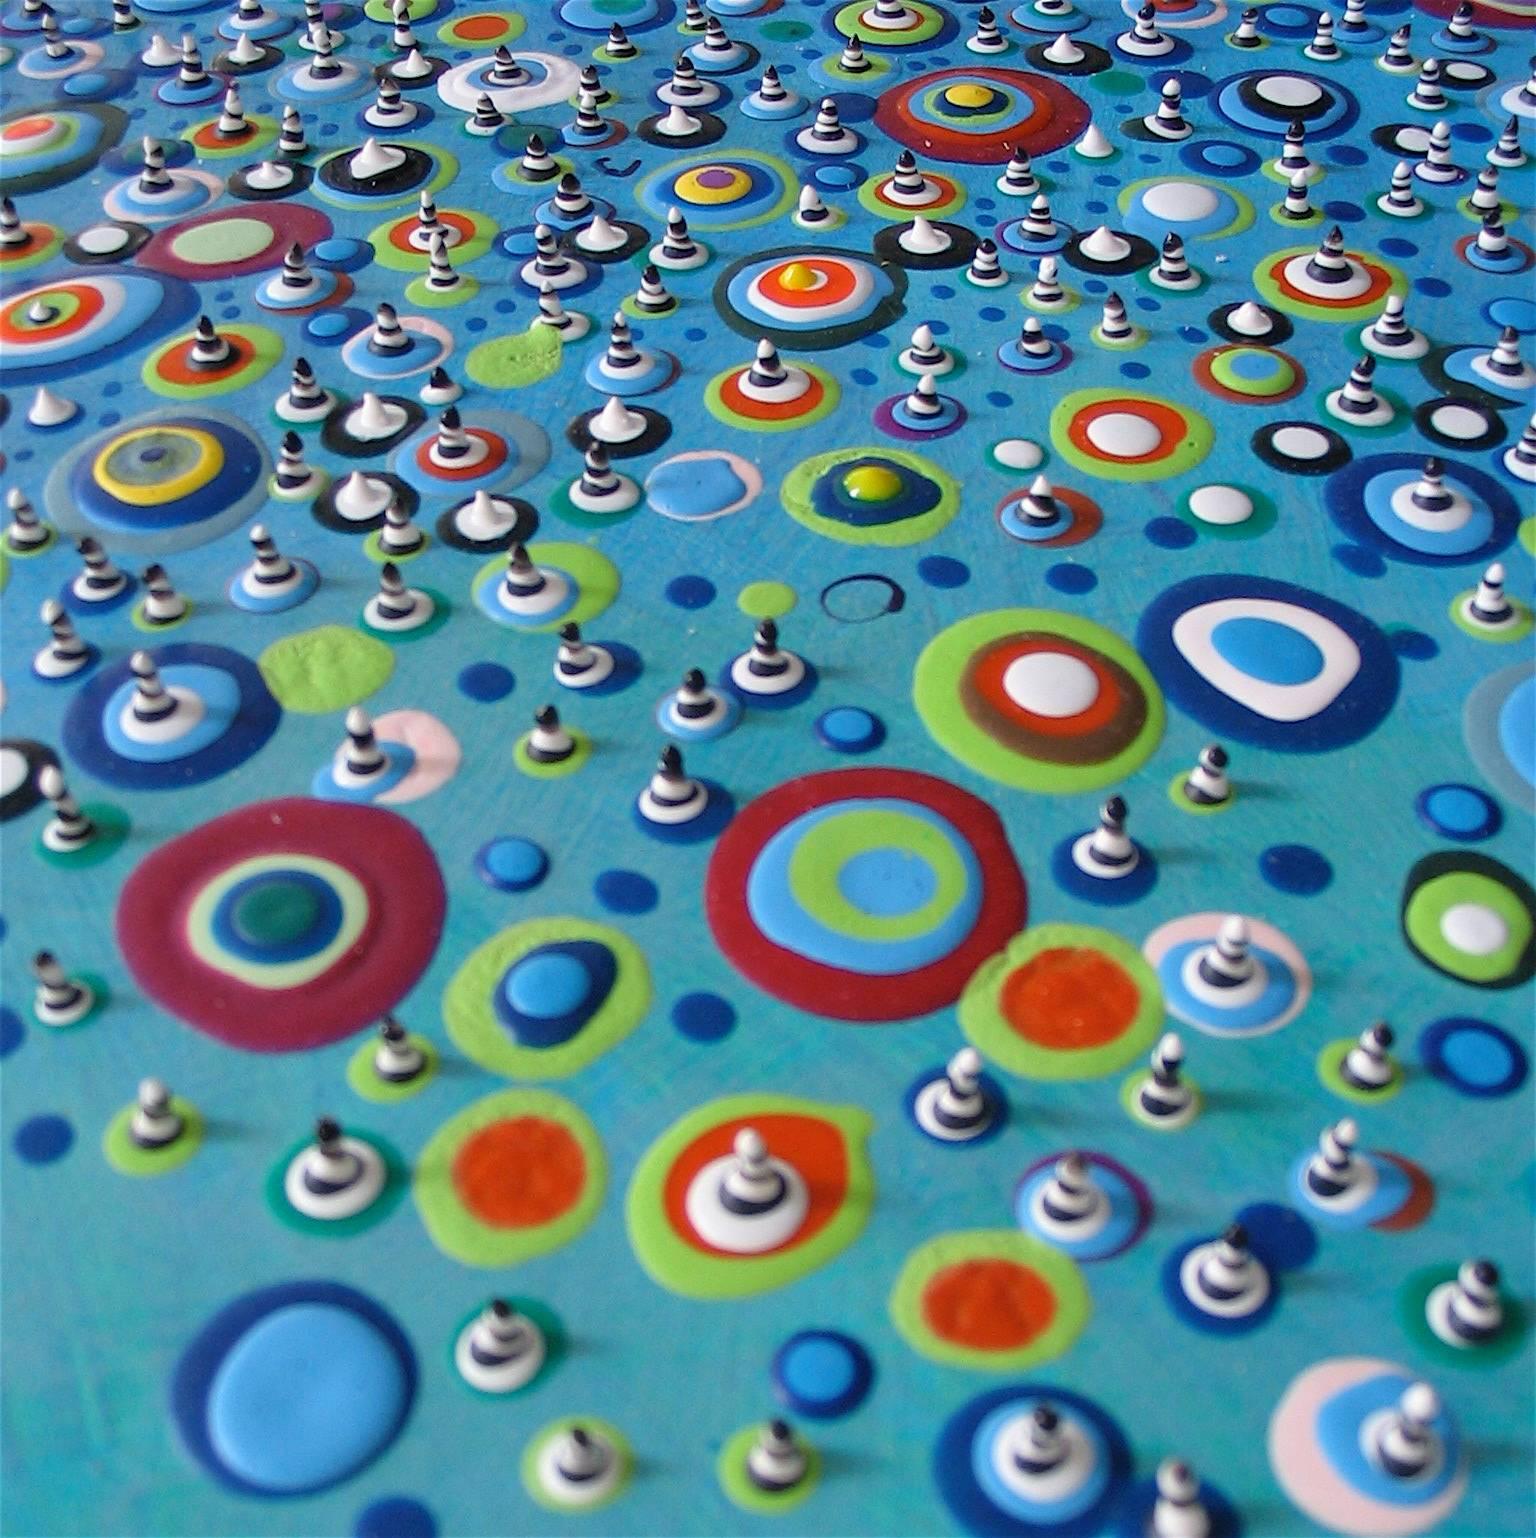 Bubbleliscious - Painting by Charlotte Smith